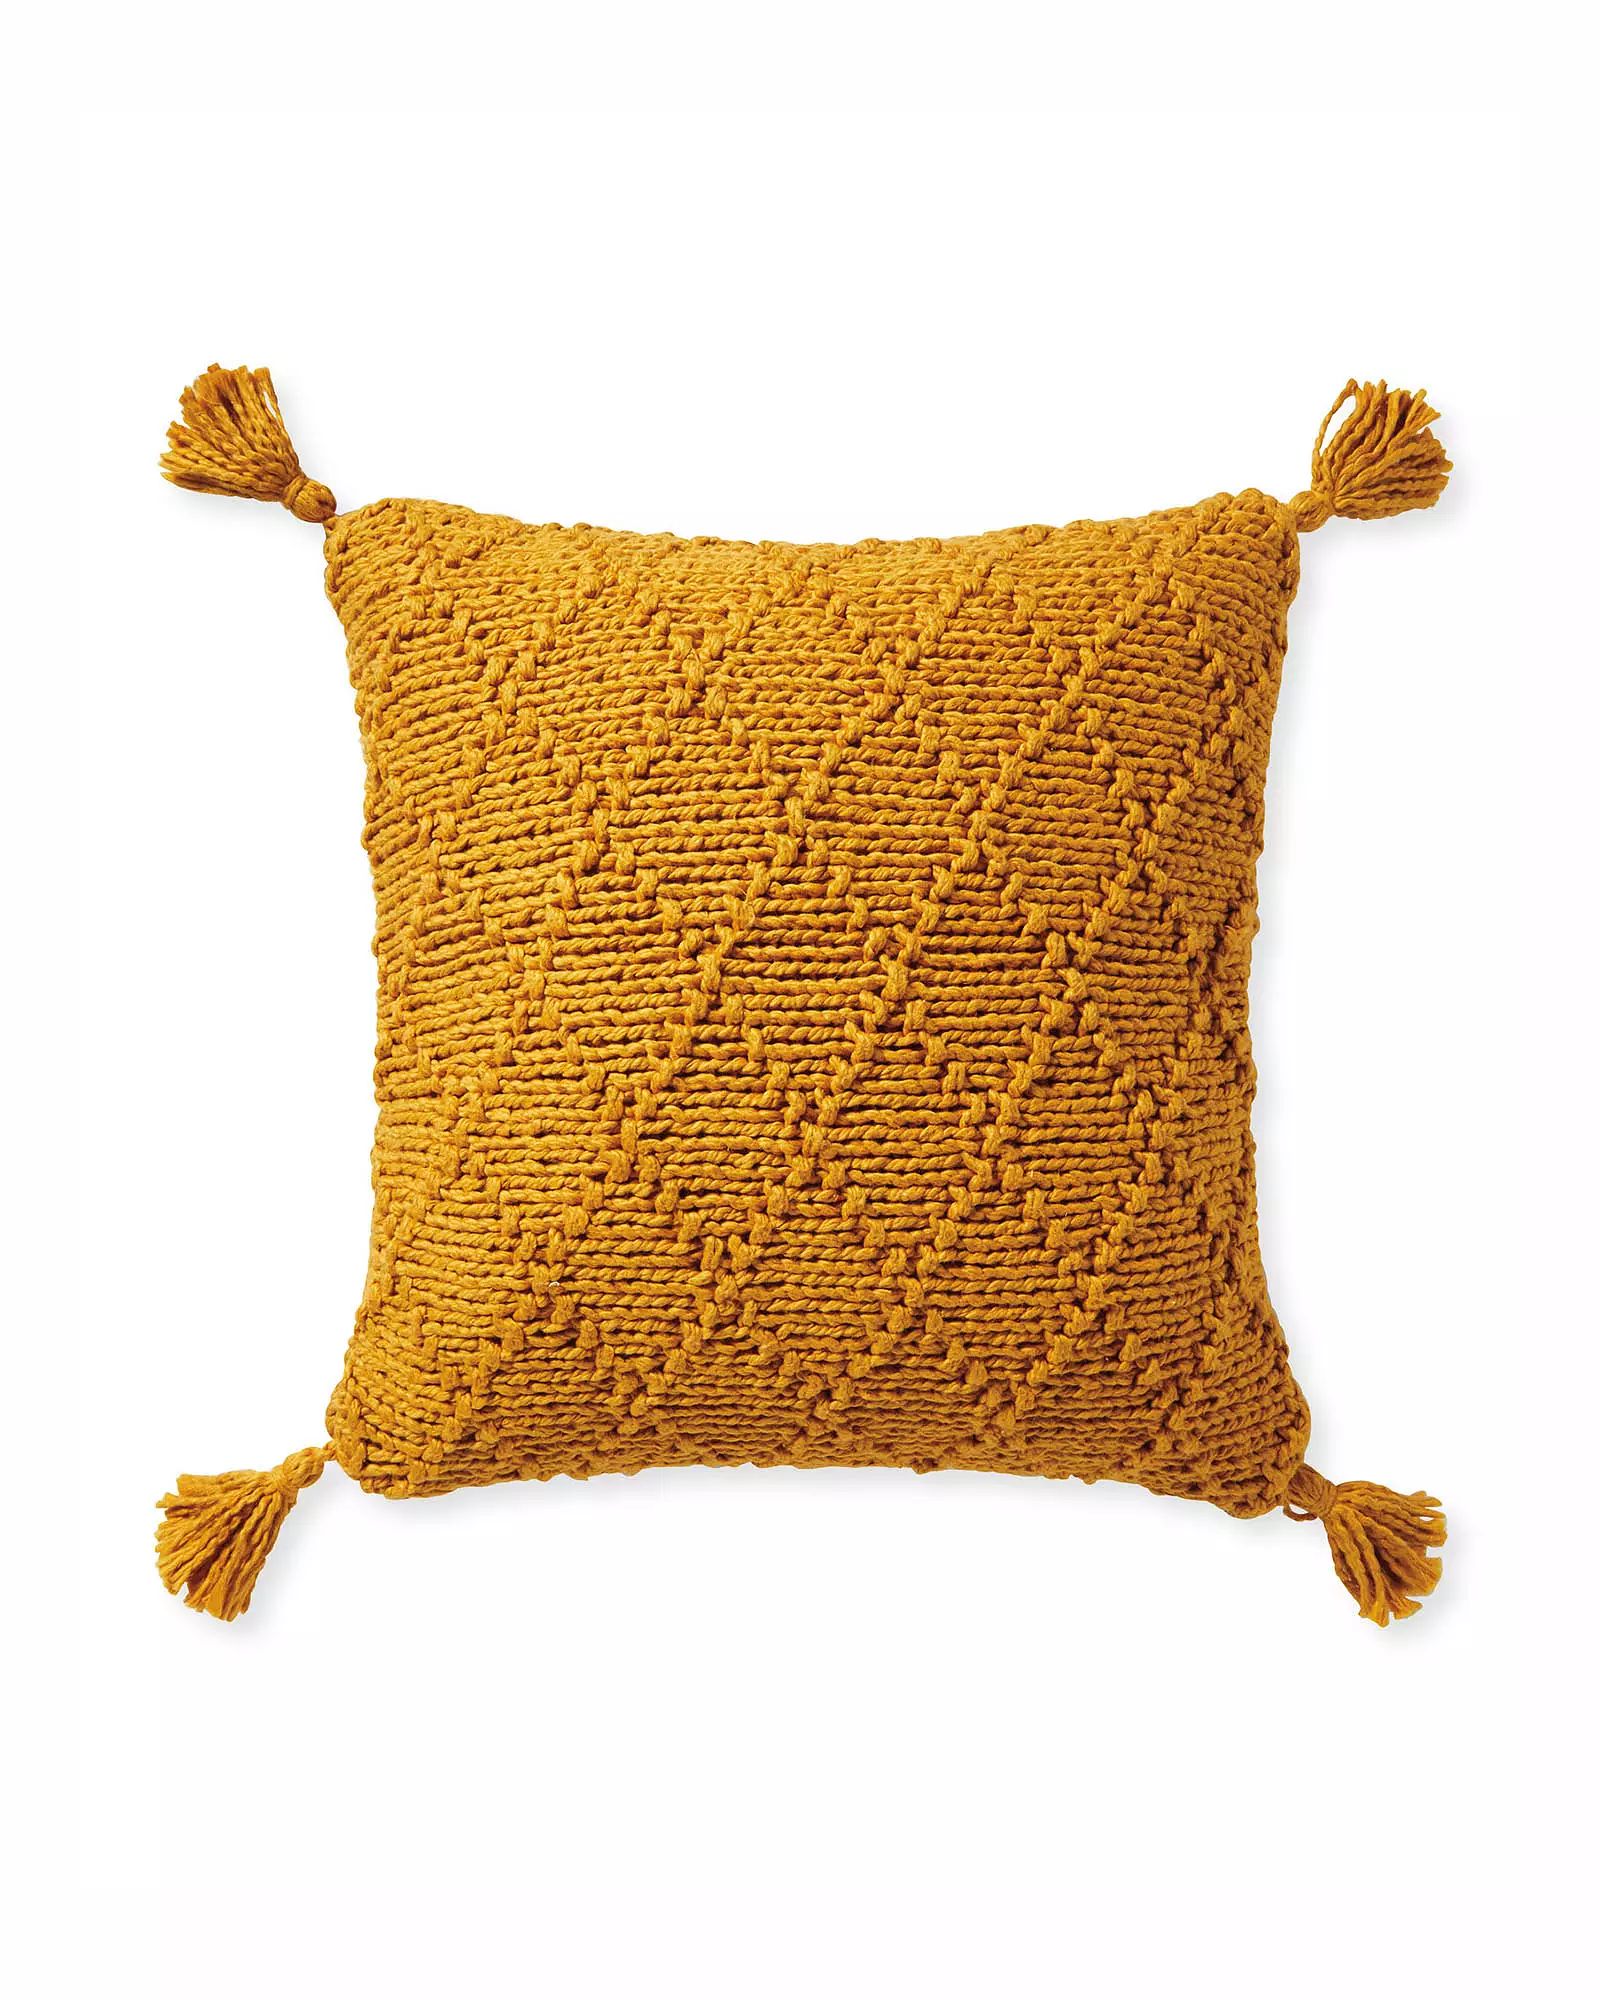 Fisherman's Knit Pillow Cover | Serena and Lily